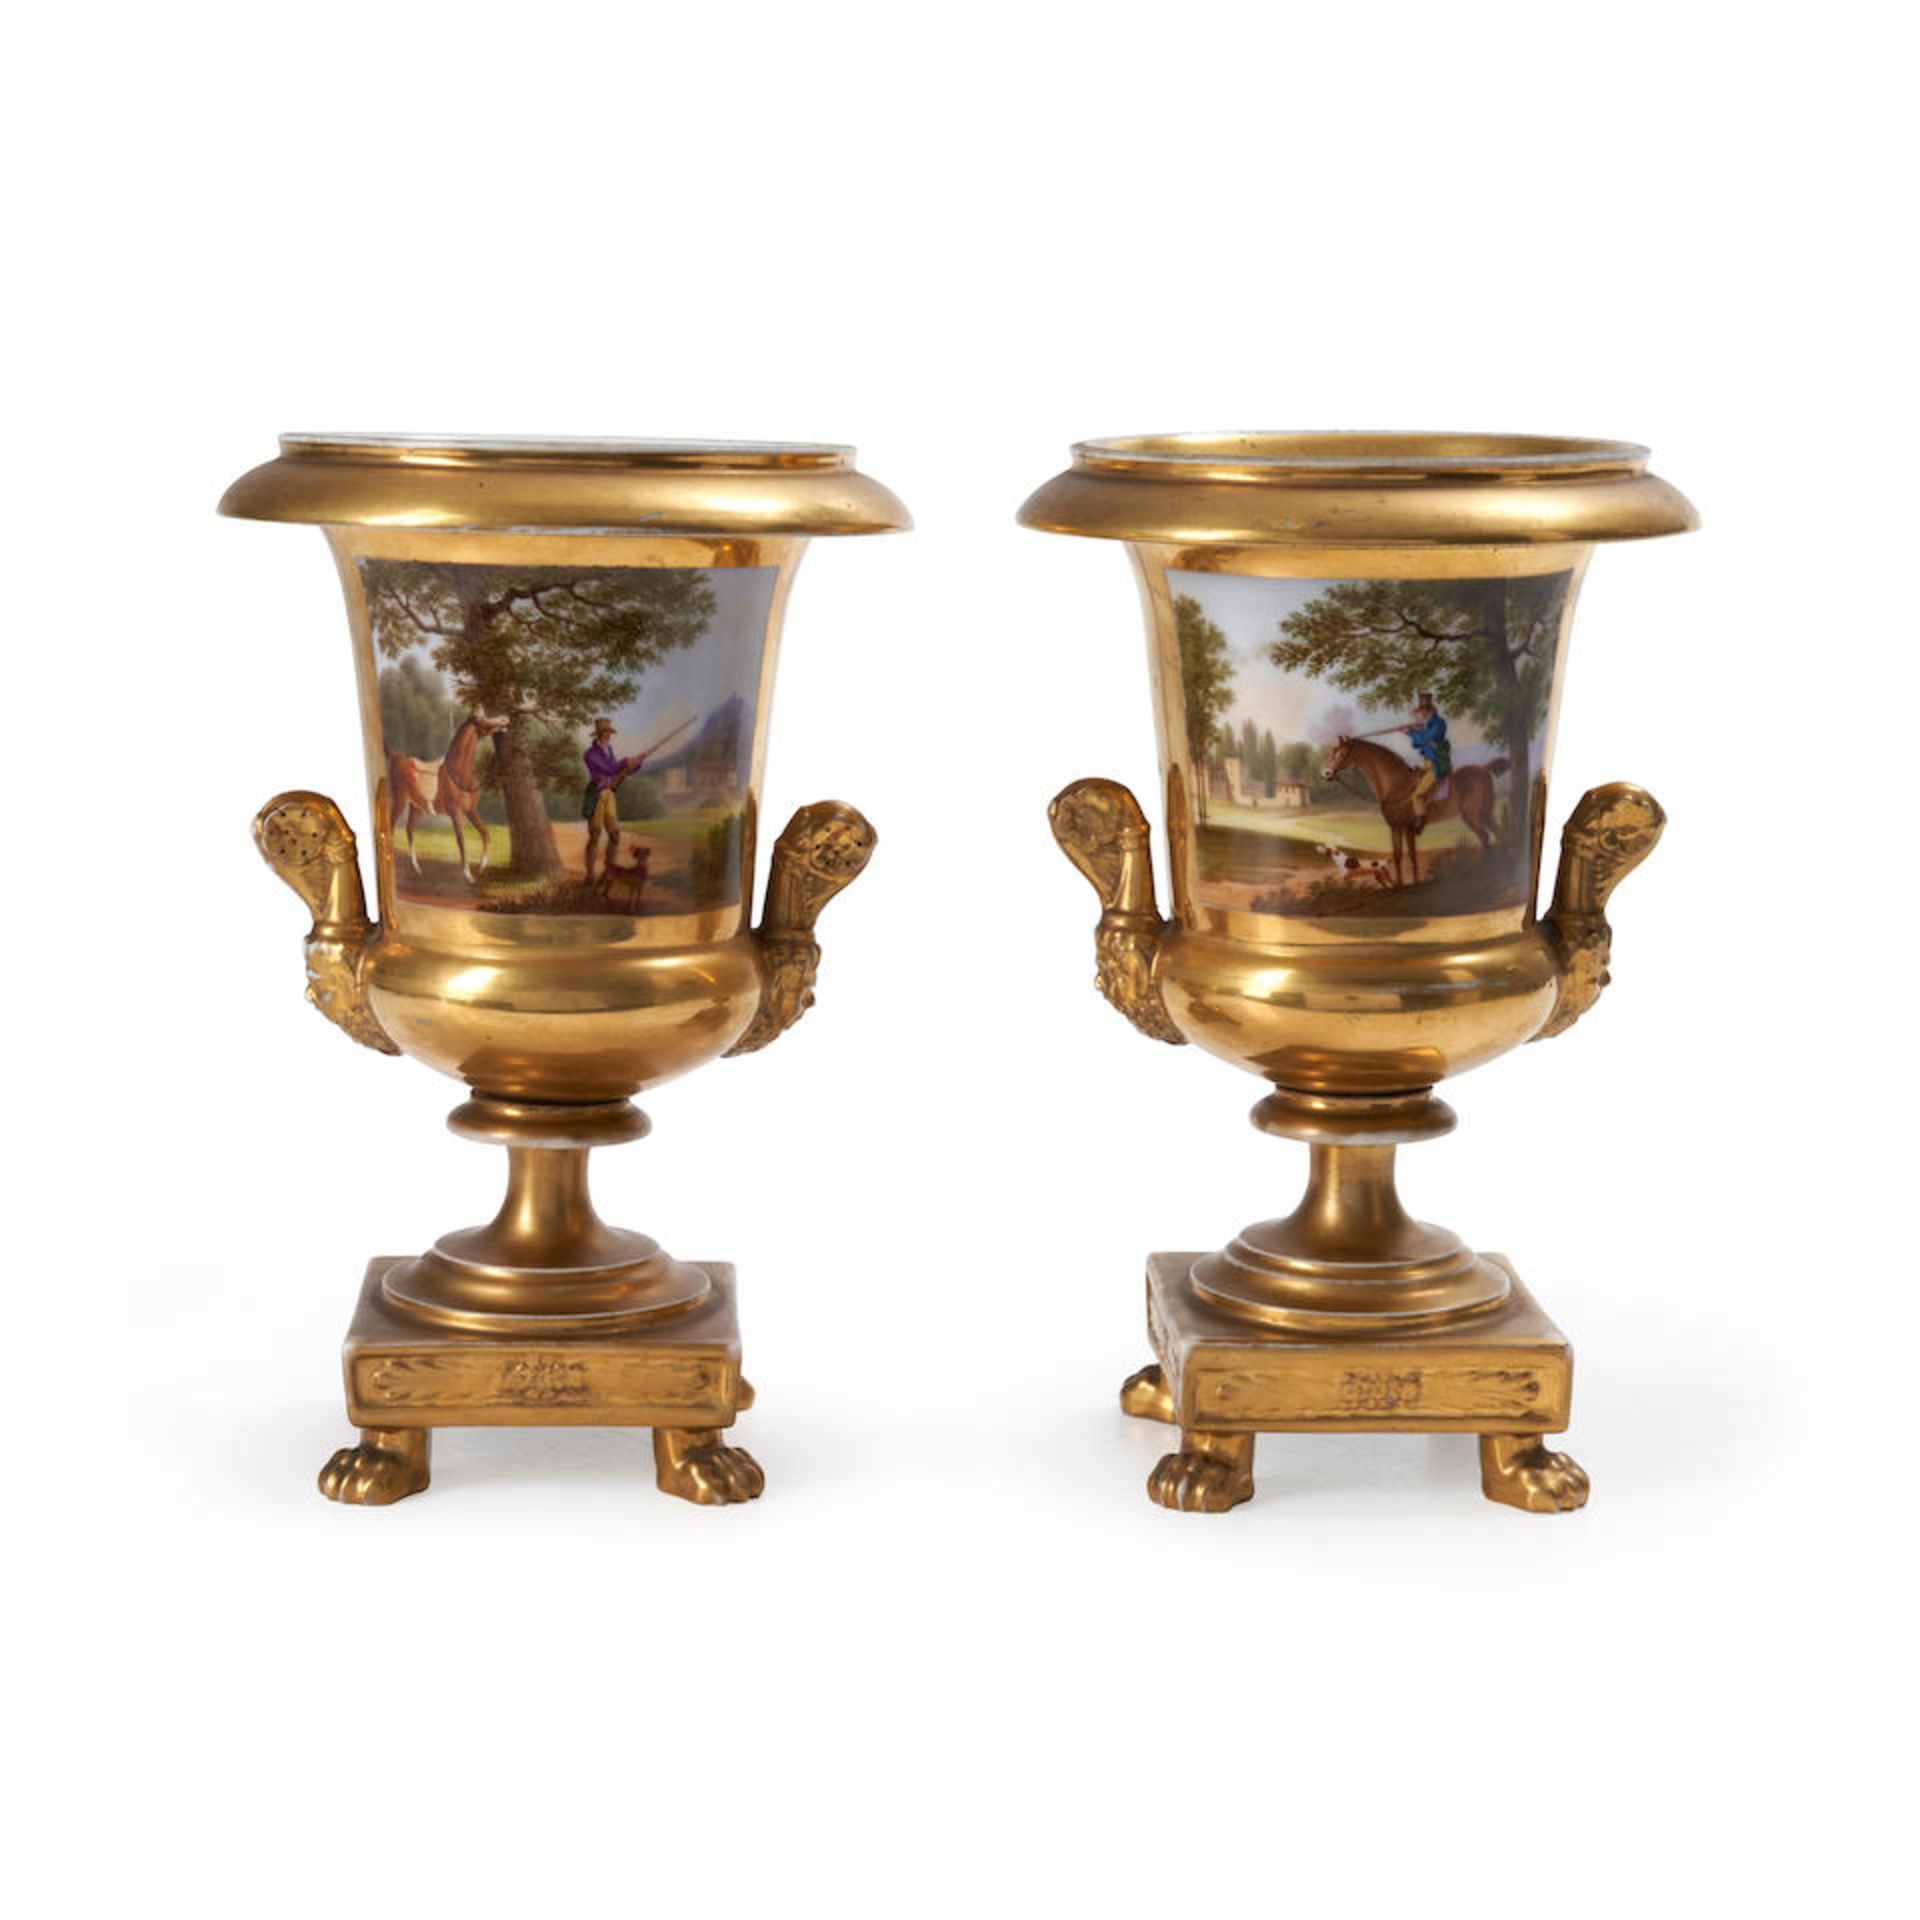 Pair of Neoclassical-style Urns, Berlin, Germany, 19th century.